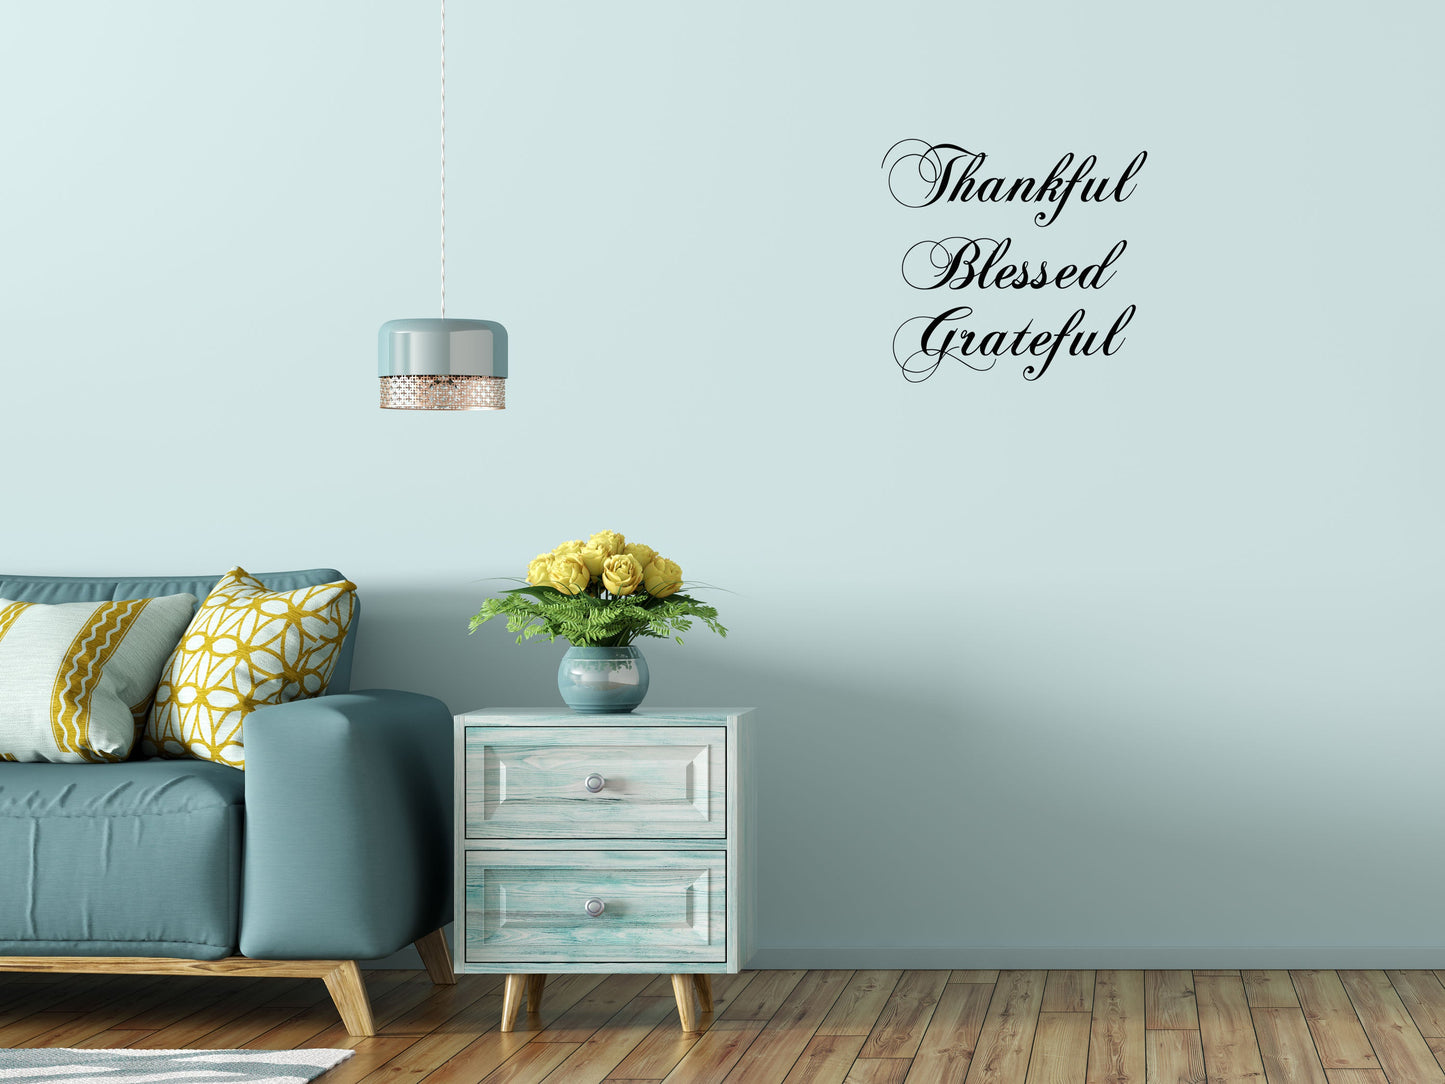 Thankful Blessed Grateful Wall Decal Quote - Spiritual Decal - Christian Decal Quote - Blessing Sticker Wall Decor - Thanksgiving Vinyl Wall Decal Inspirational Wall Signs 